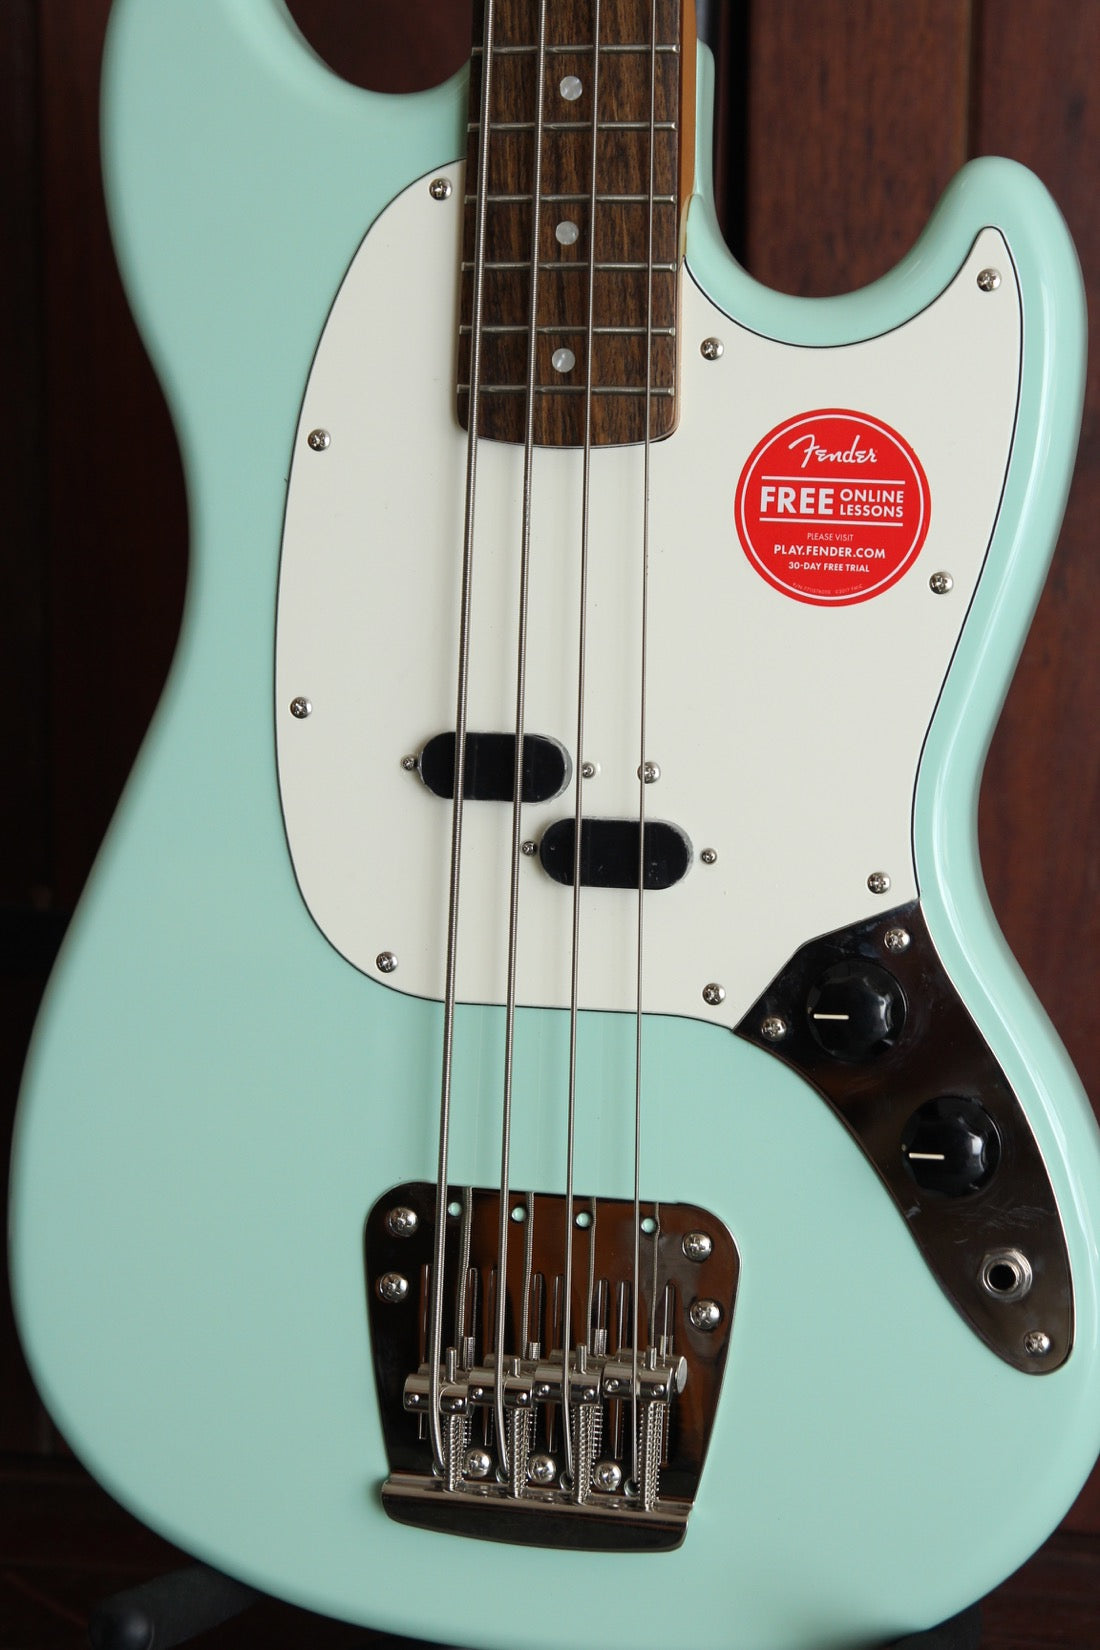 Squier Classic Vibe 60s Mustang Bass Surf Green The Rock Inn